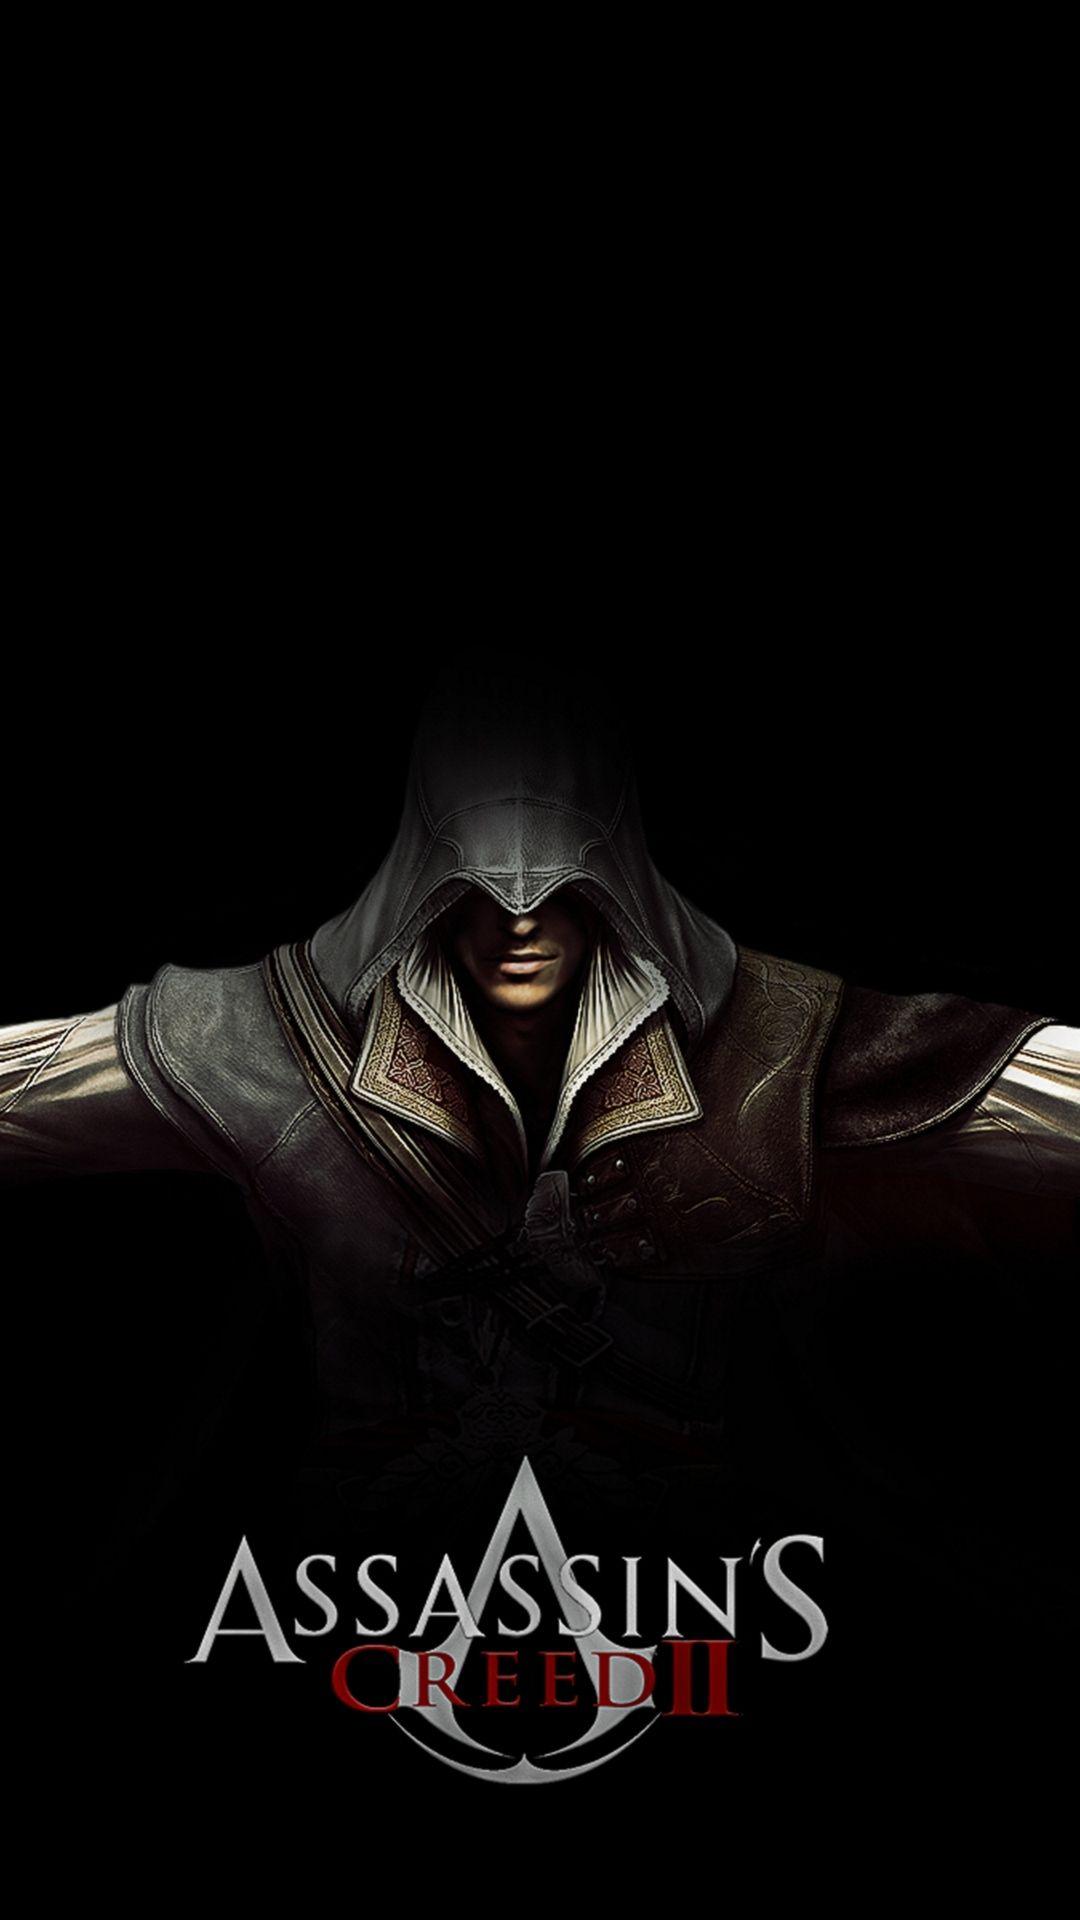 The first Assassin's Creed movie will hit theaters December 21st, 2016